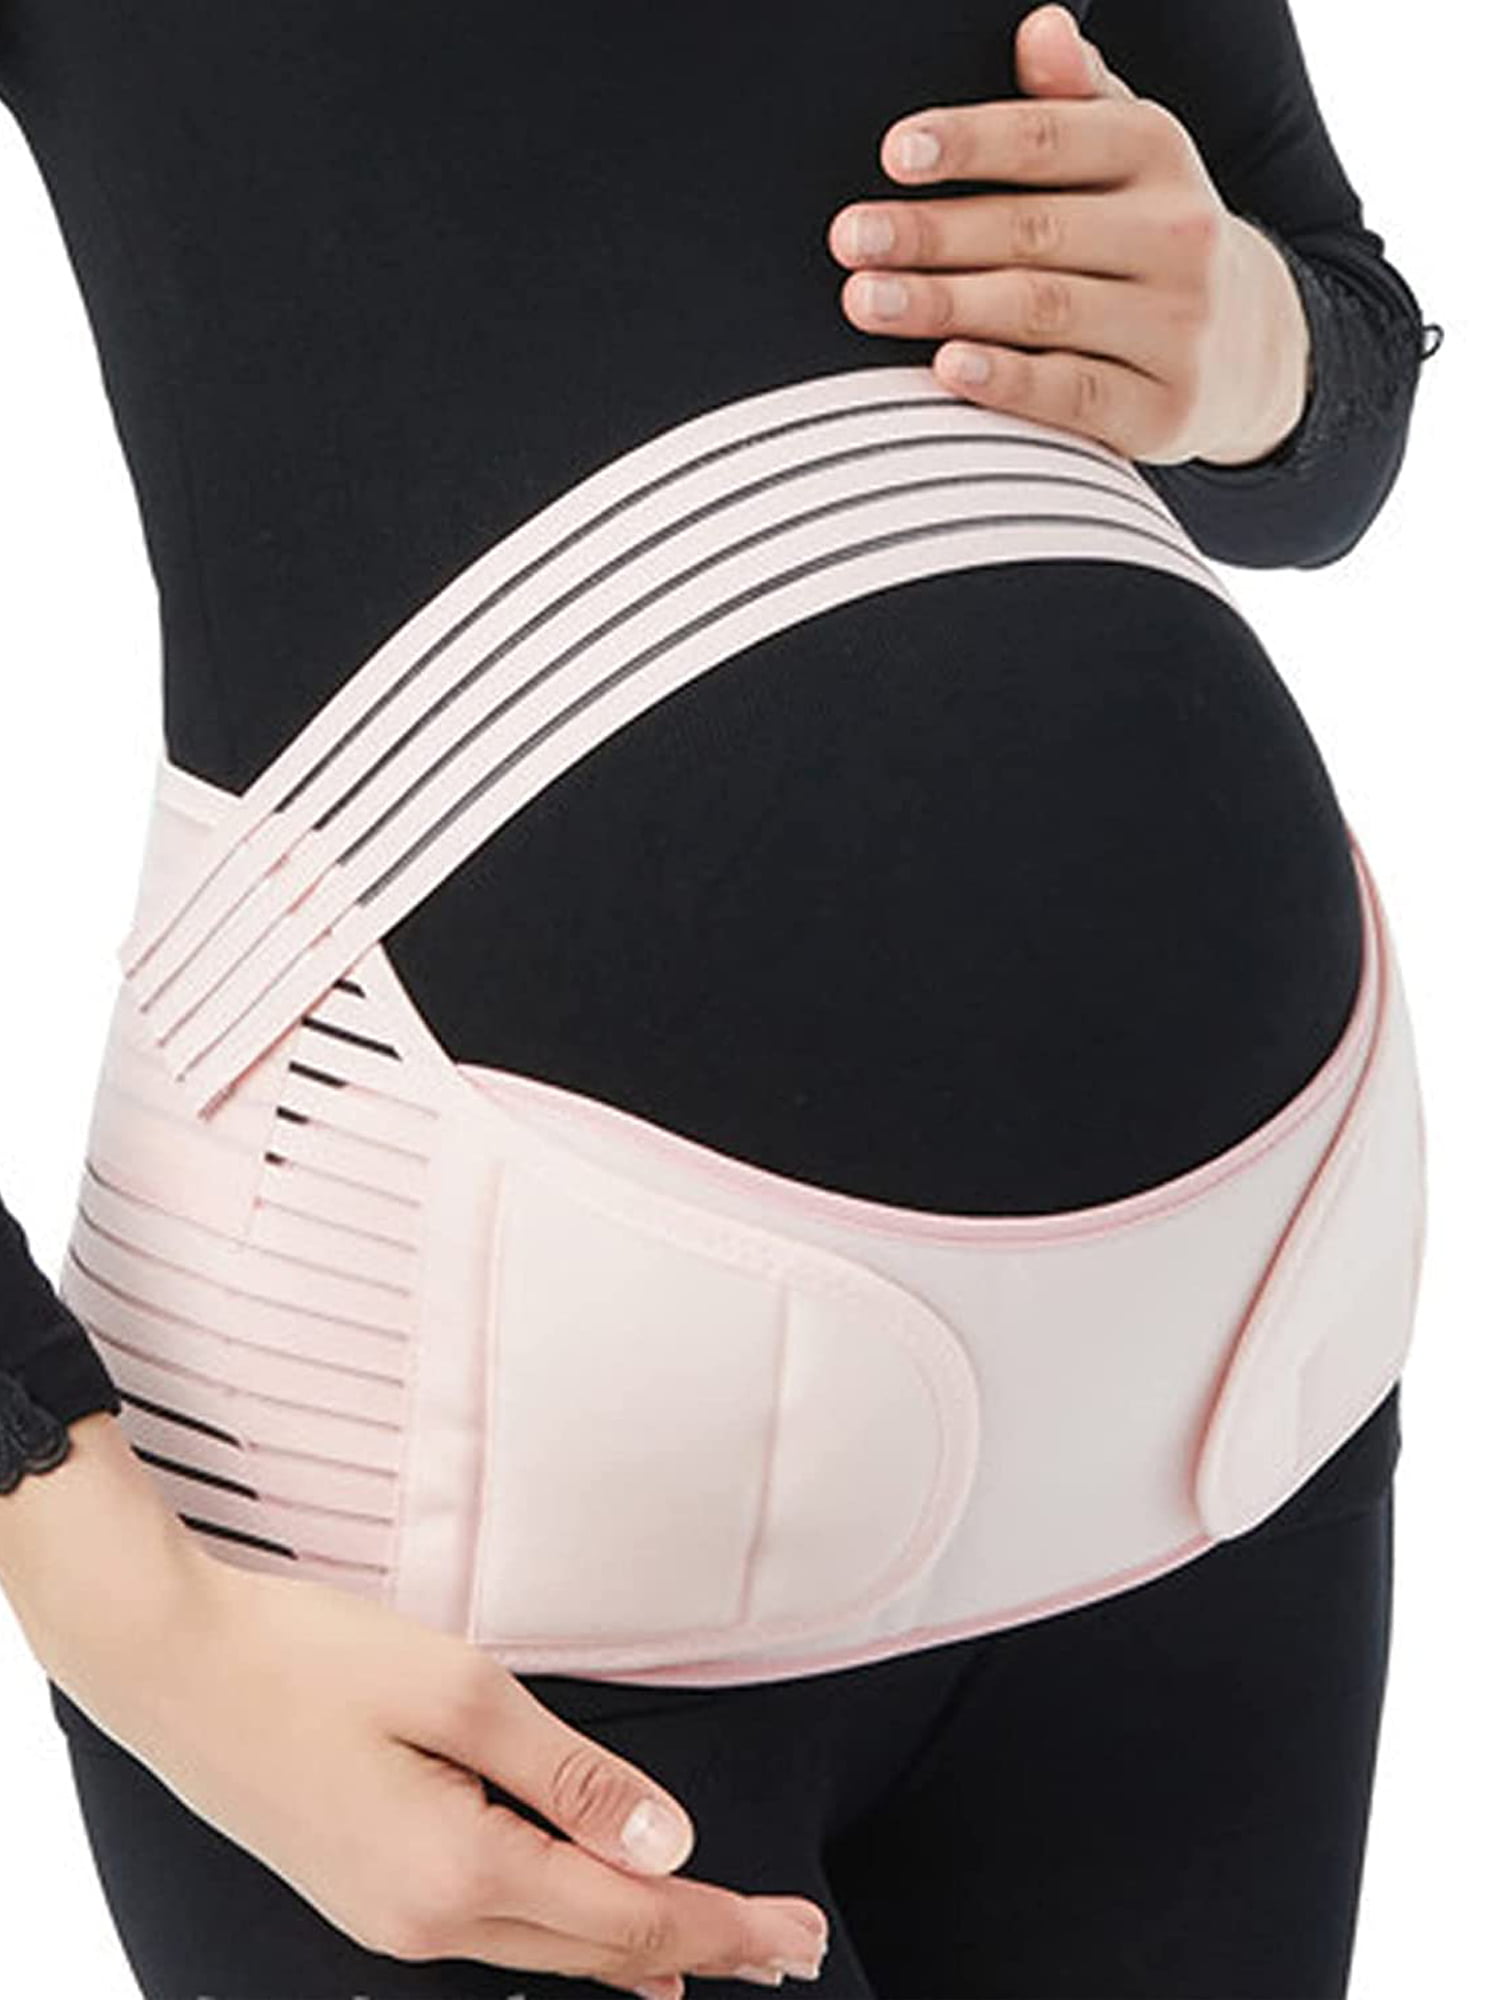 Maternity Belt Pregnancy 3 in 1 Support Belt for Back/Pelvic/Hip/Waist Pain  Maternity Band Belly Support